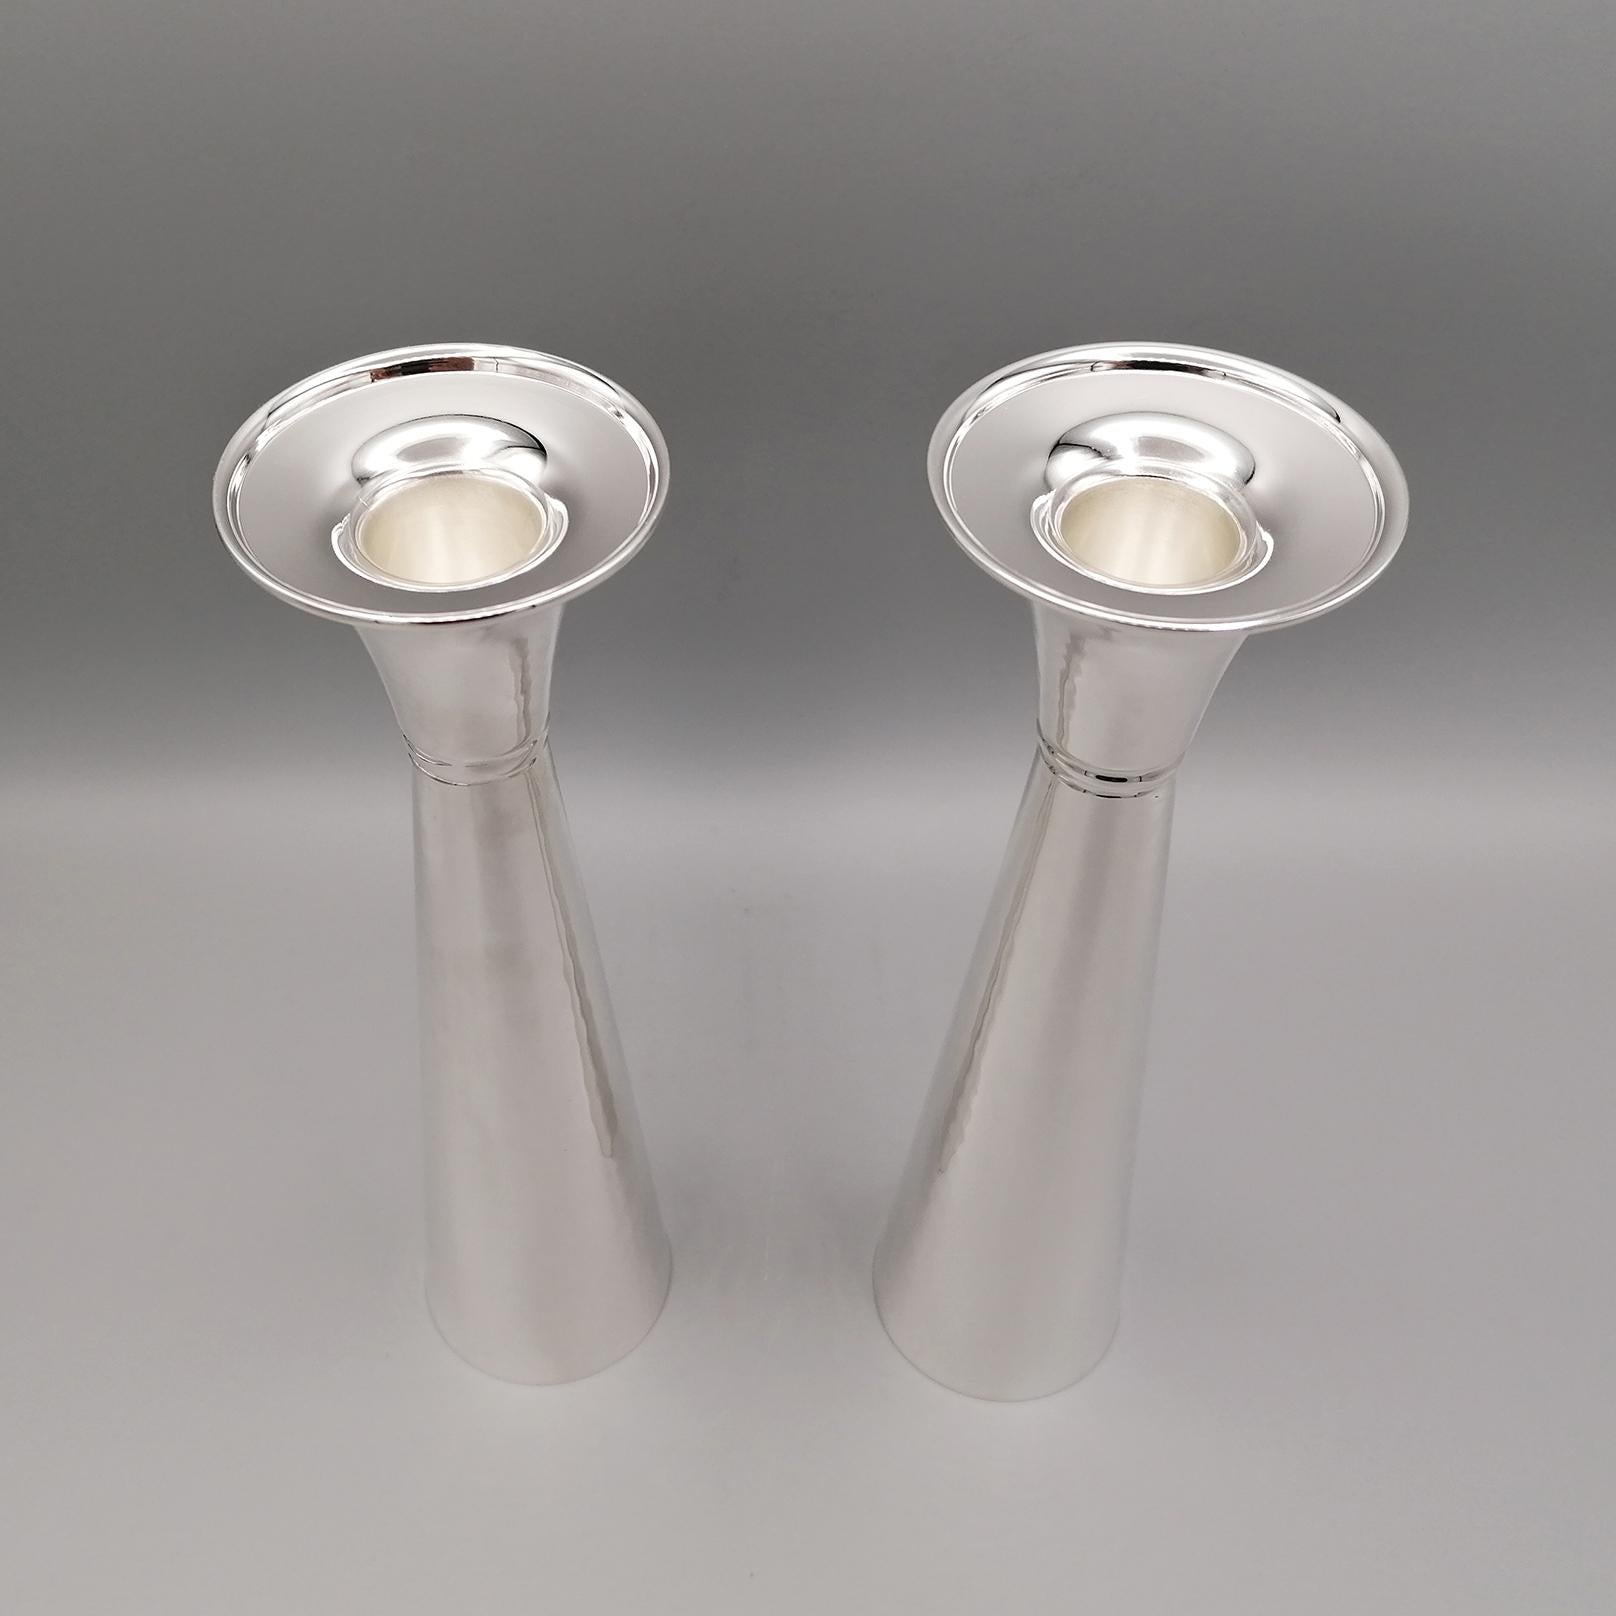 Late 20th Century Pair of 20th Century Italian Sterling Silver Champagne Flutes-Vases-Candlesticks For Sale